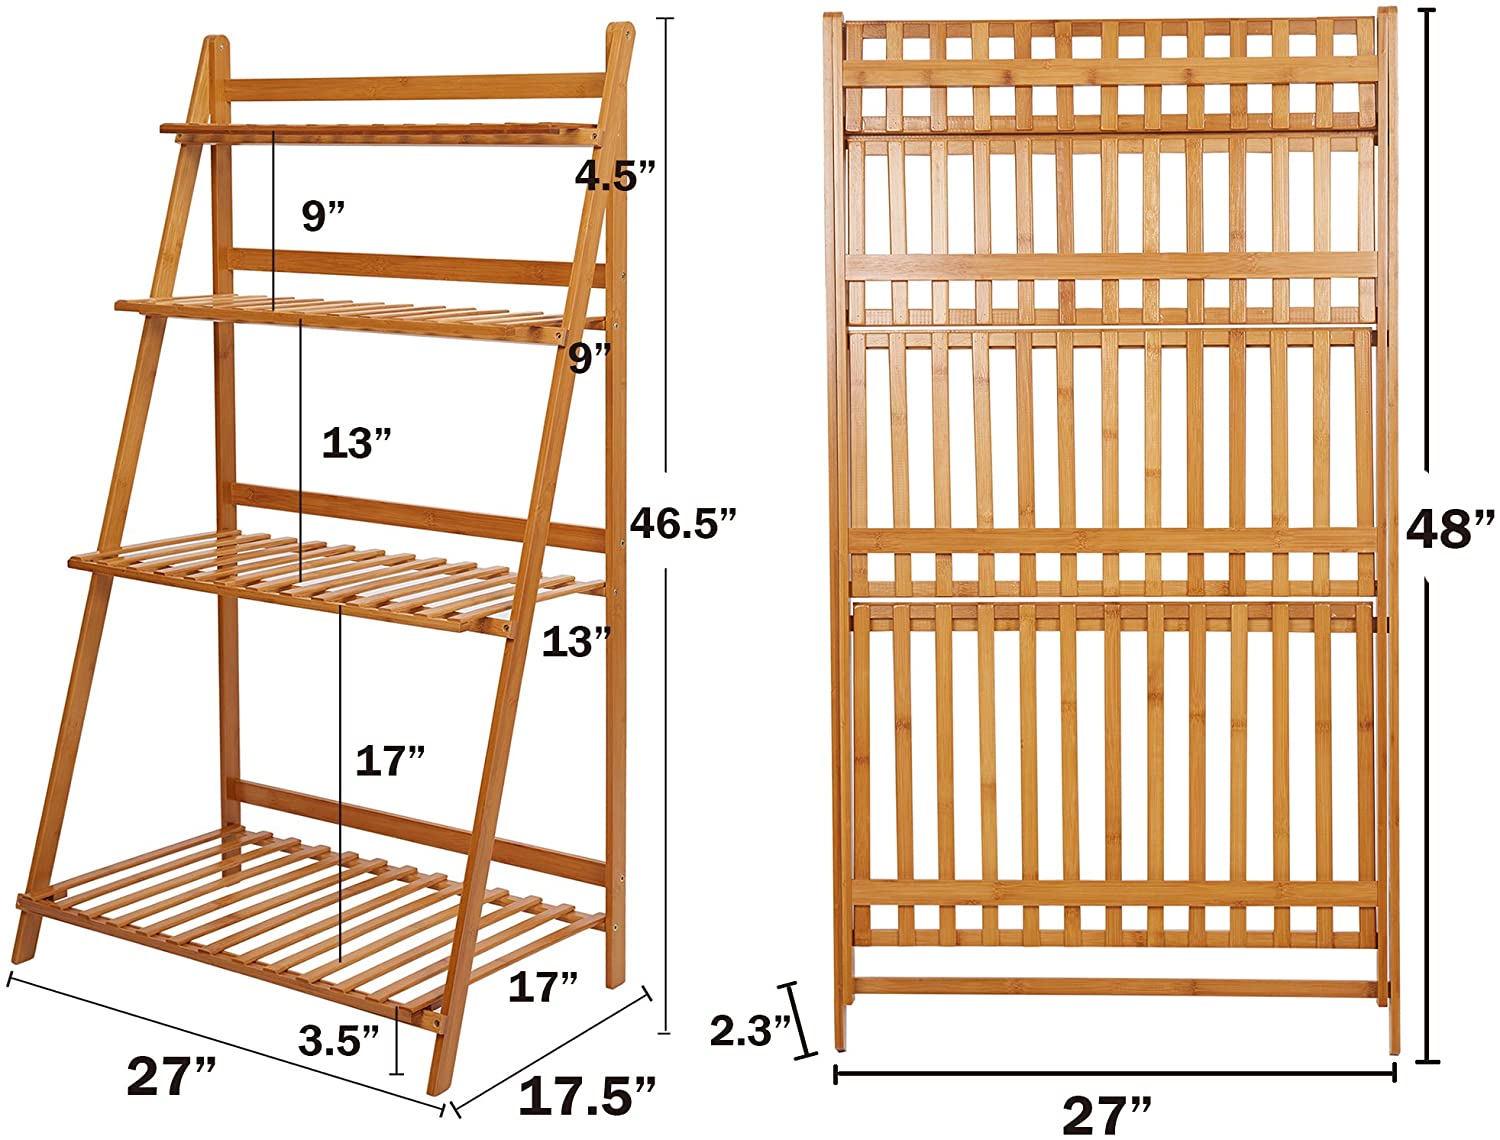 4 Tier Plant Stand Shelf Rack Bamboo Folding Ladder Potted Holder Display Shelving Indoor Flower Organizer Outdoor Patio Lawn Garden Balcony